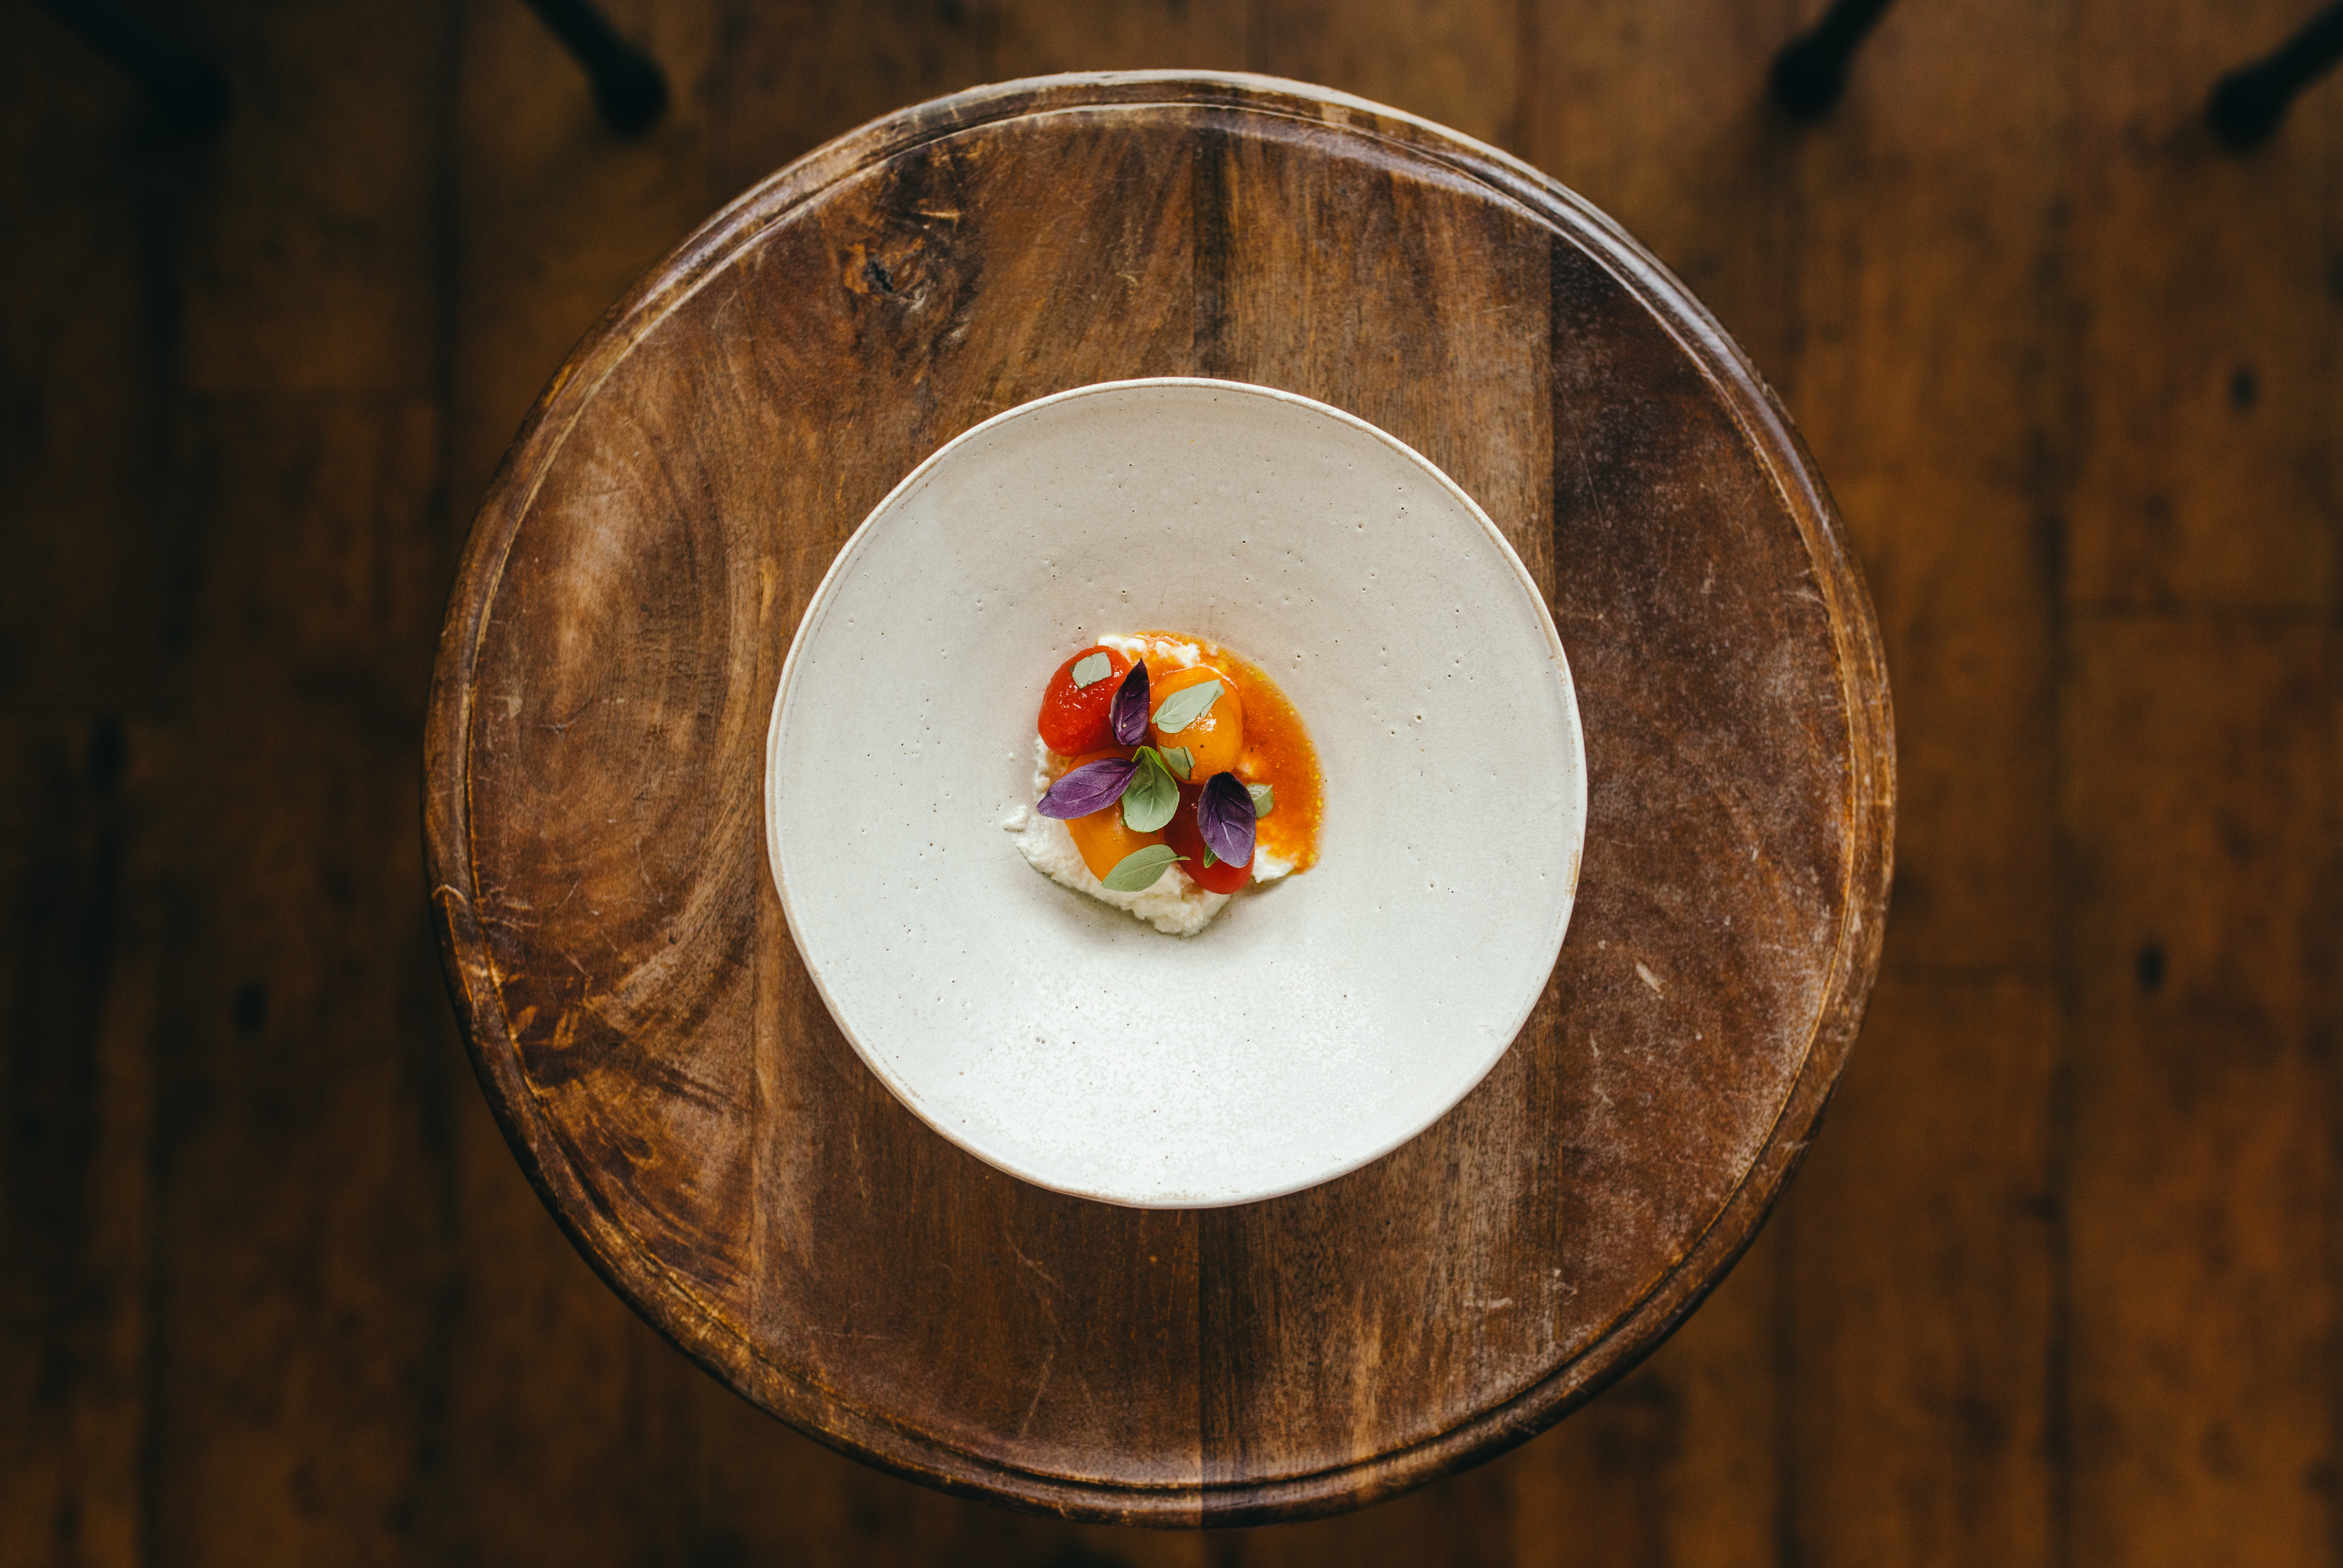 Food photography for michelin star restaurants